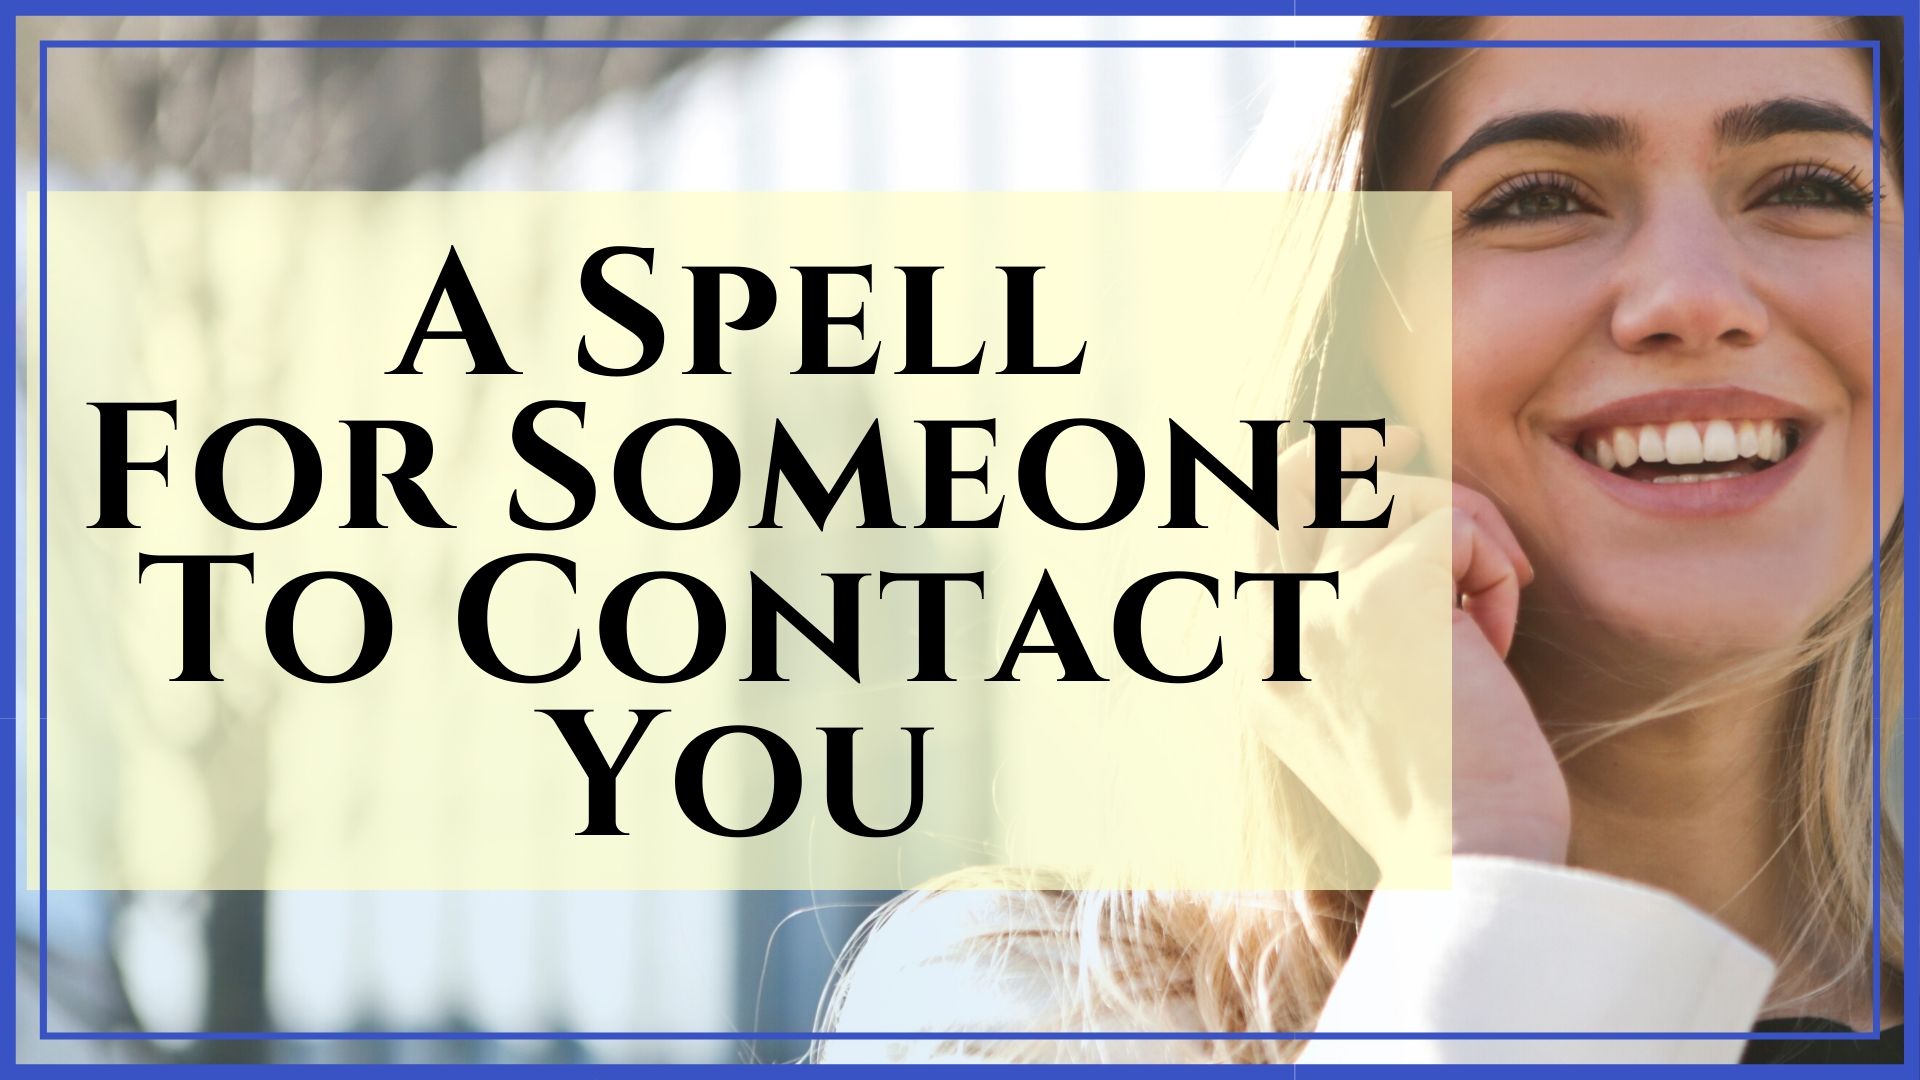 A Spell for Someone to Contact You